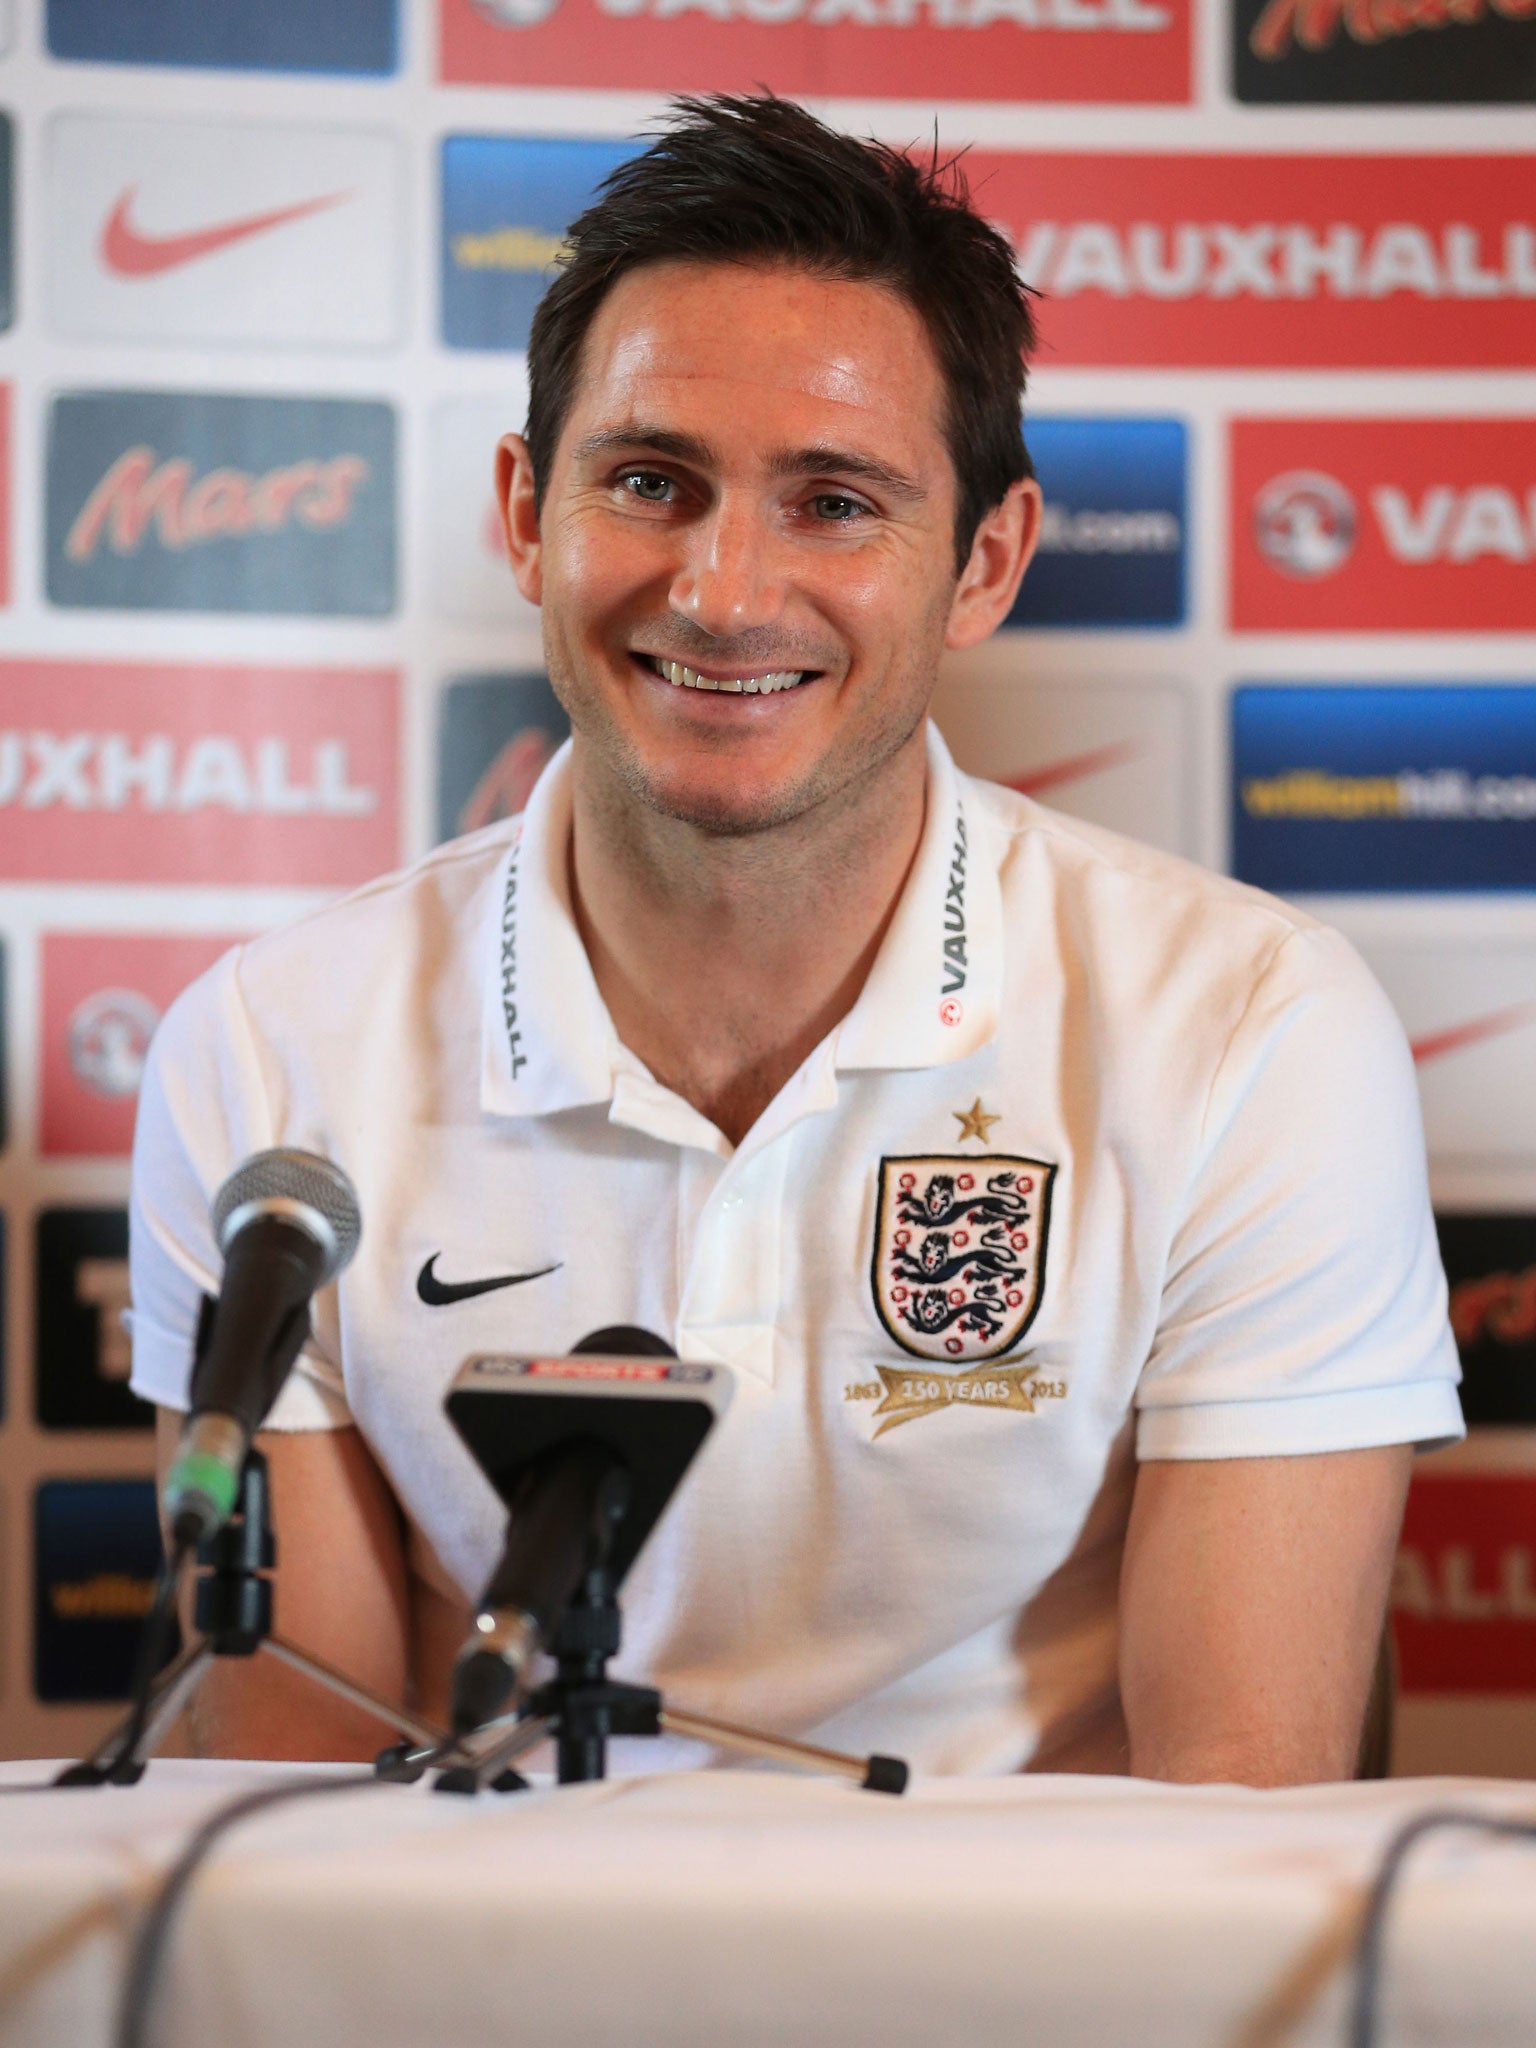 Frank Lampard will be handed a golden cap by Sir Geoff Hurst